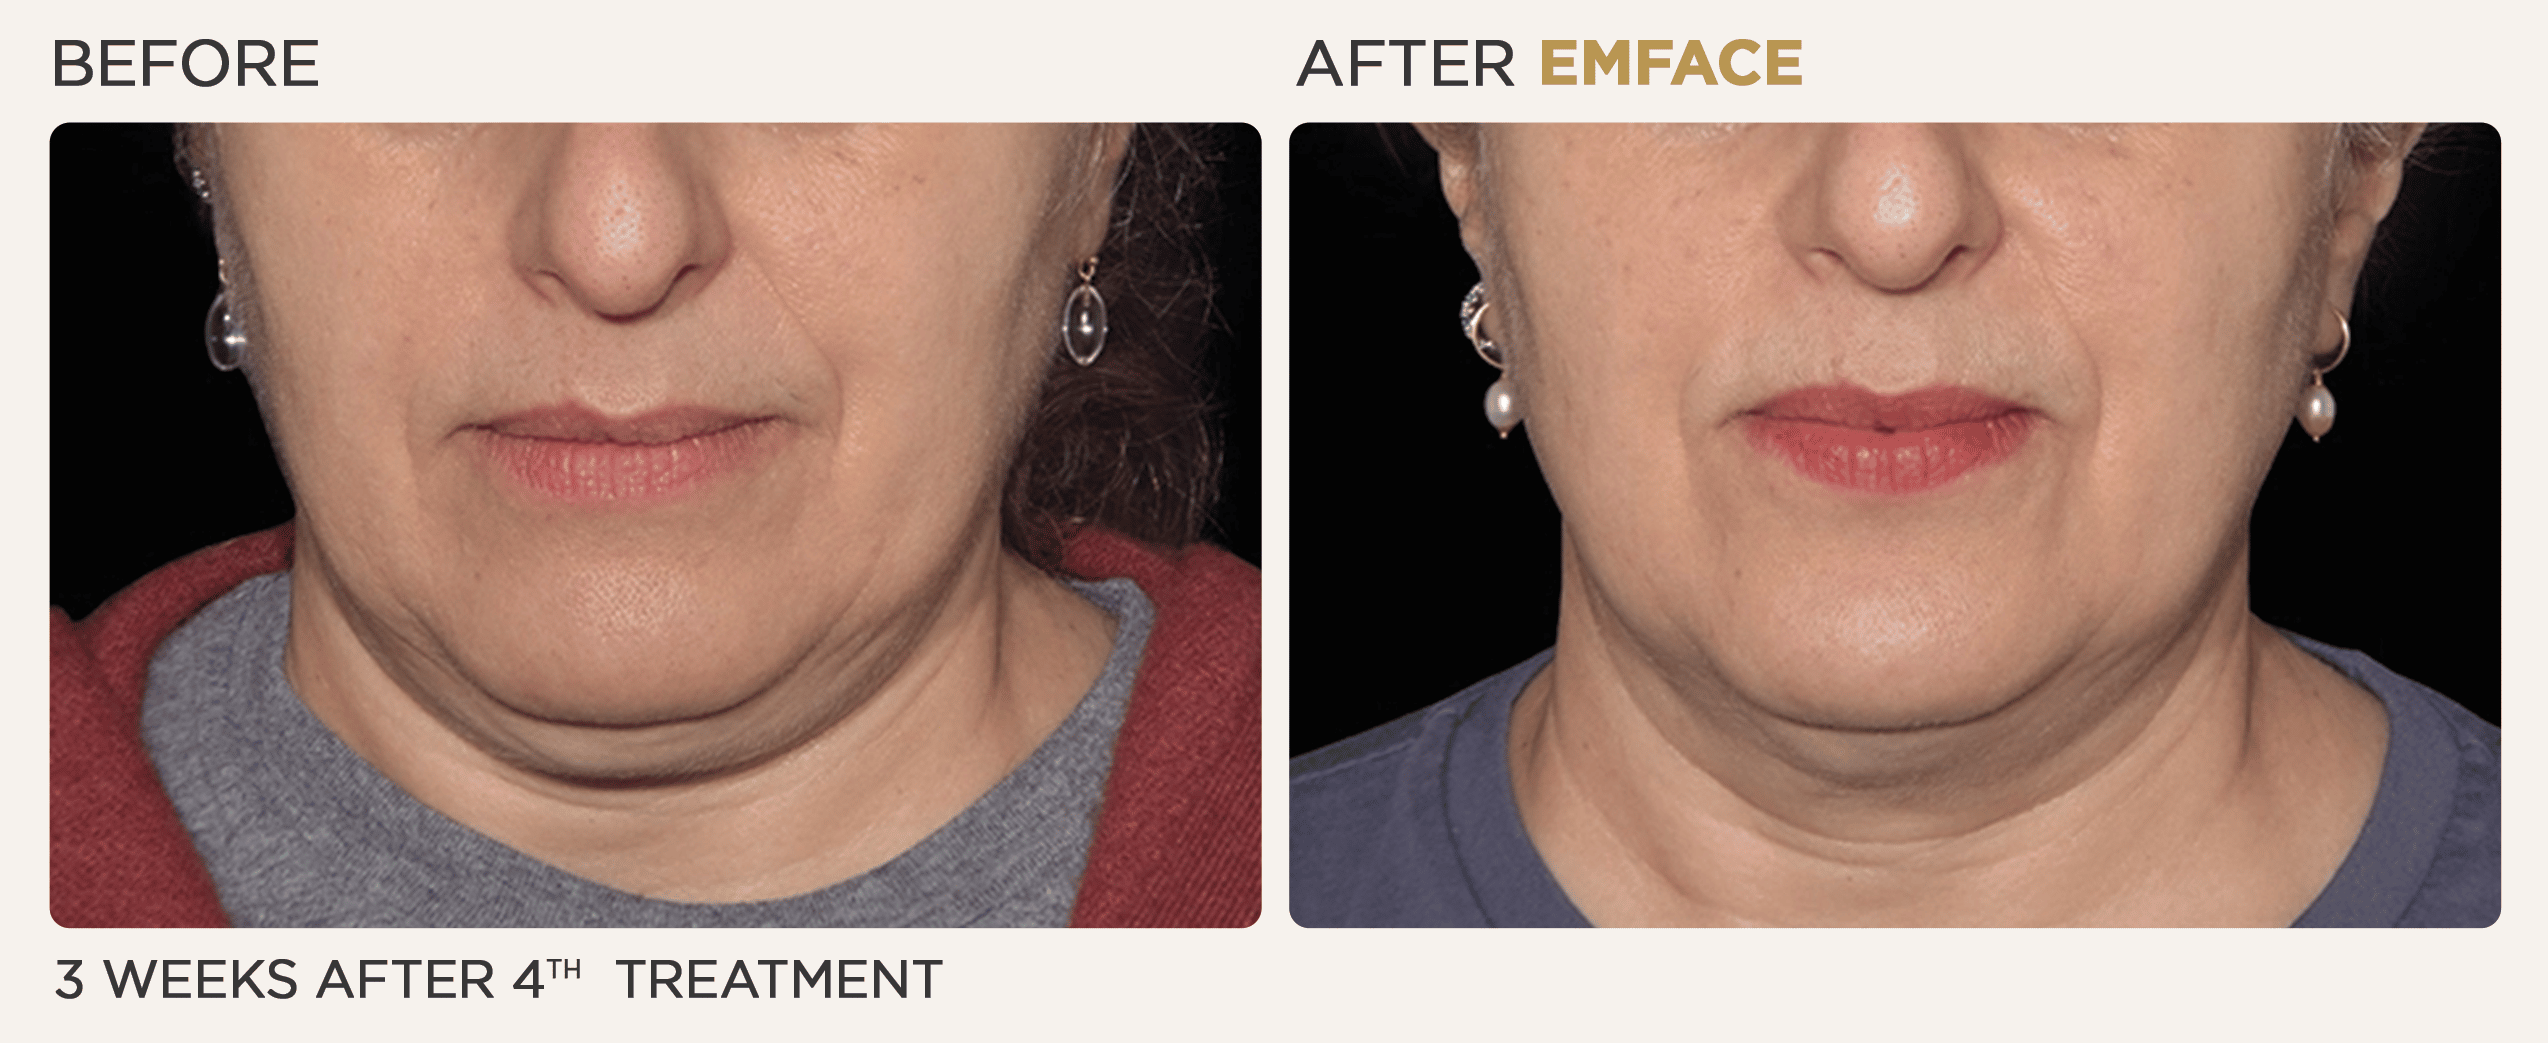 Woman's lower face showing before and after results from EMface treatment at Vitalyc Medspa in Addison.